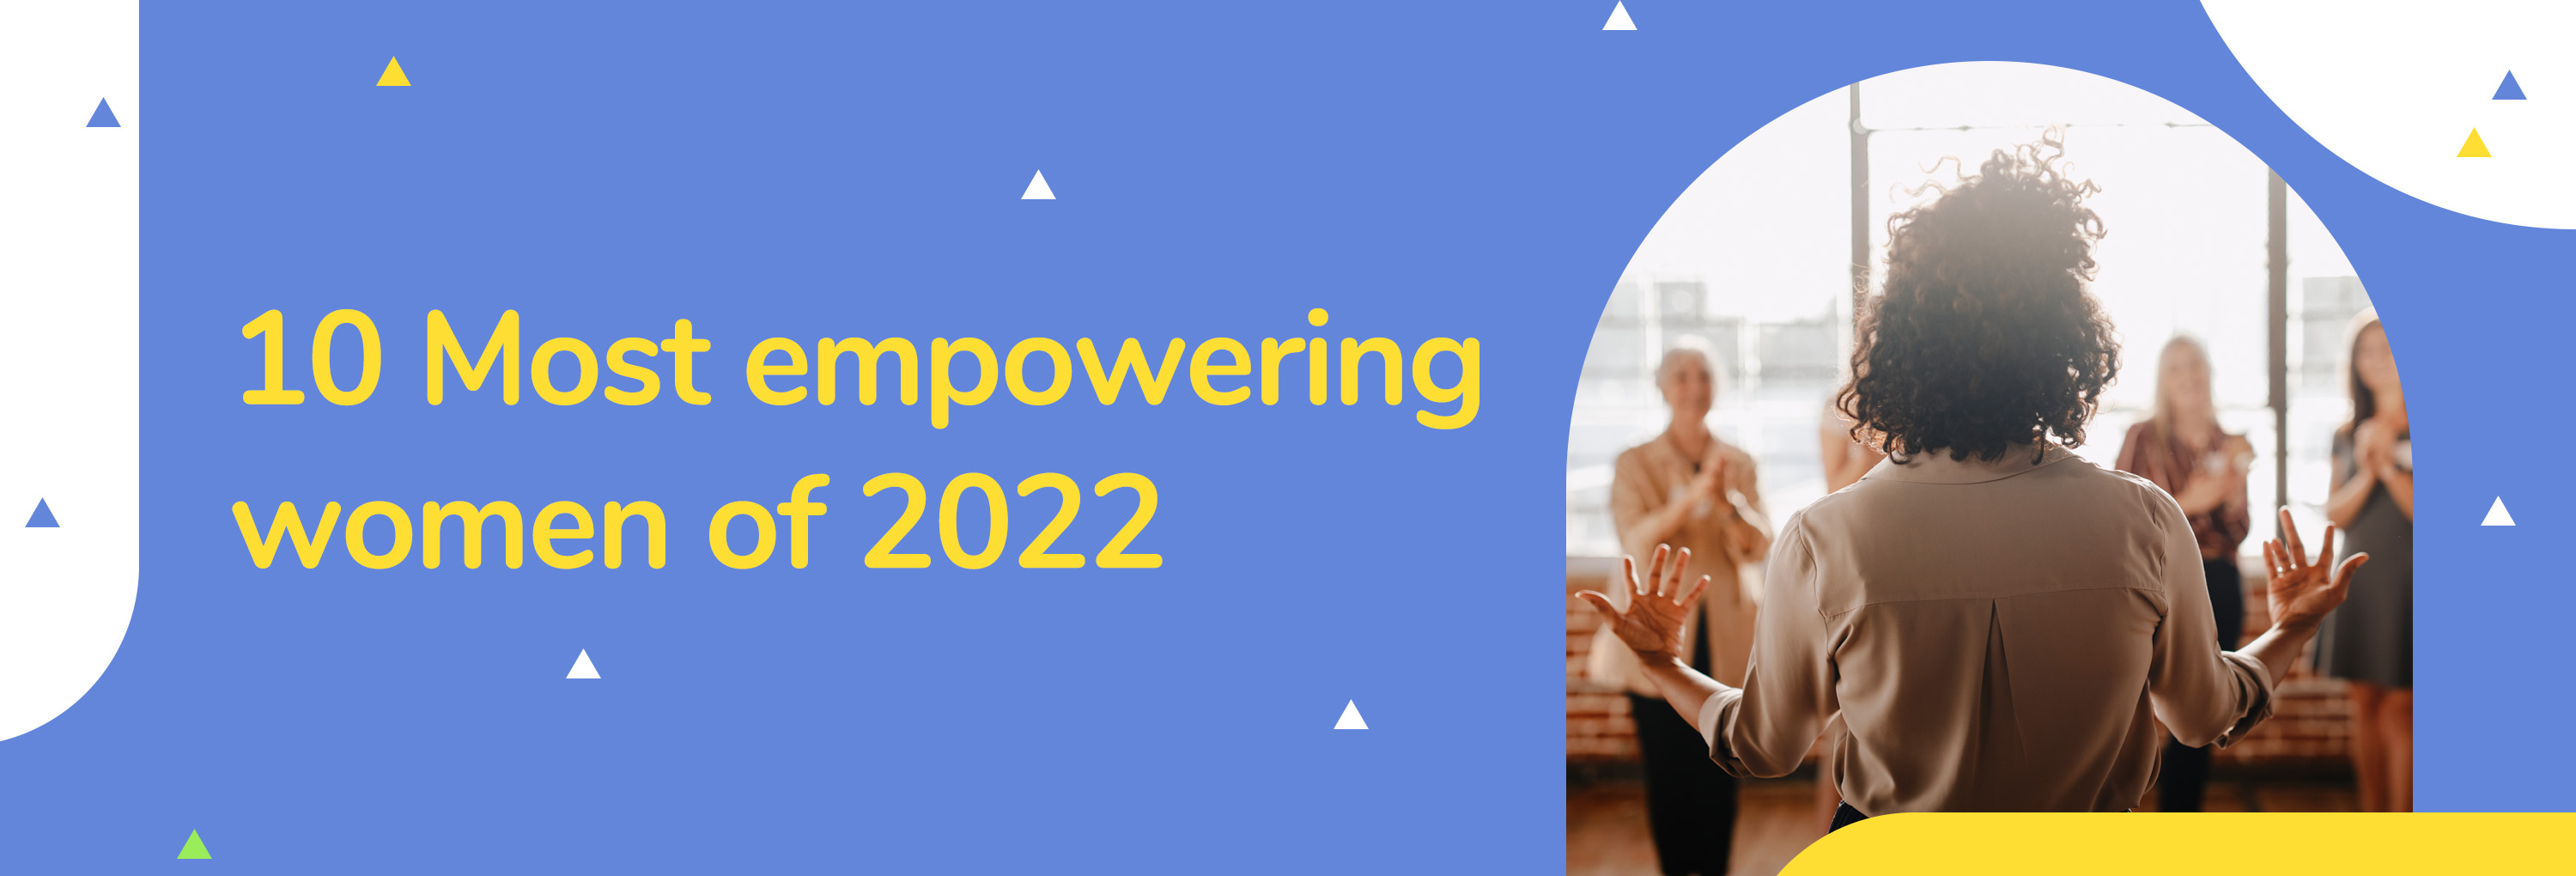 10 Most empowering women of 2022